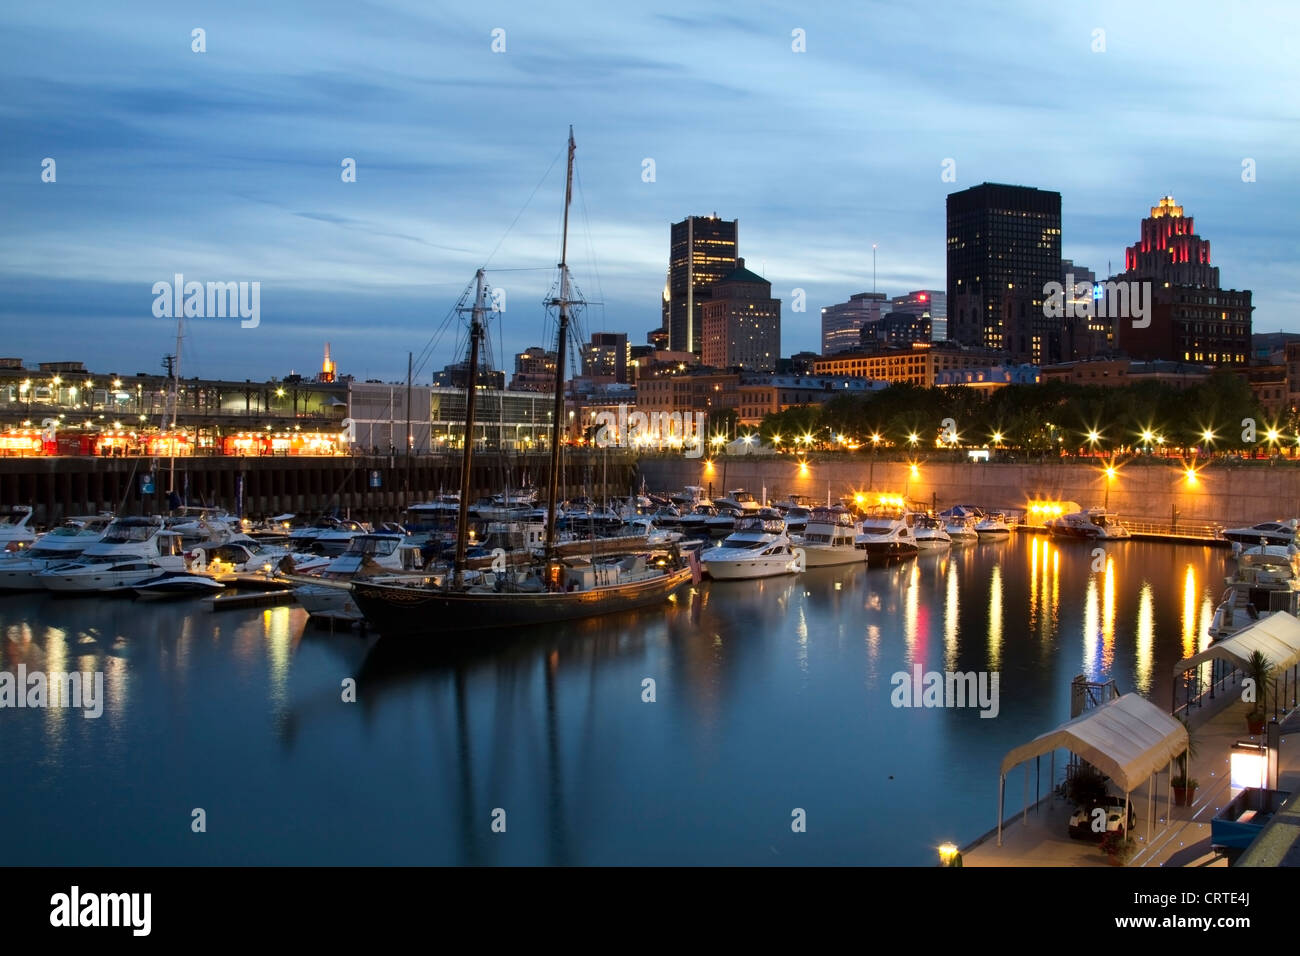 Downtown Montreal at dusk as seen from the old port, Quebec Stock Photo